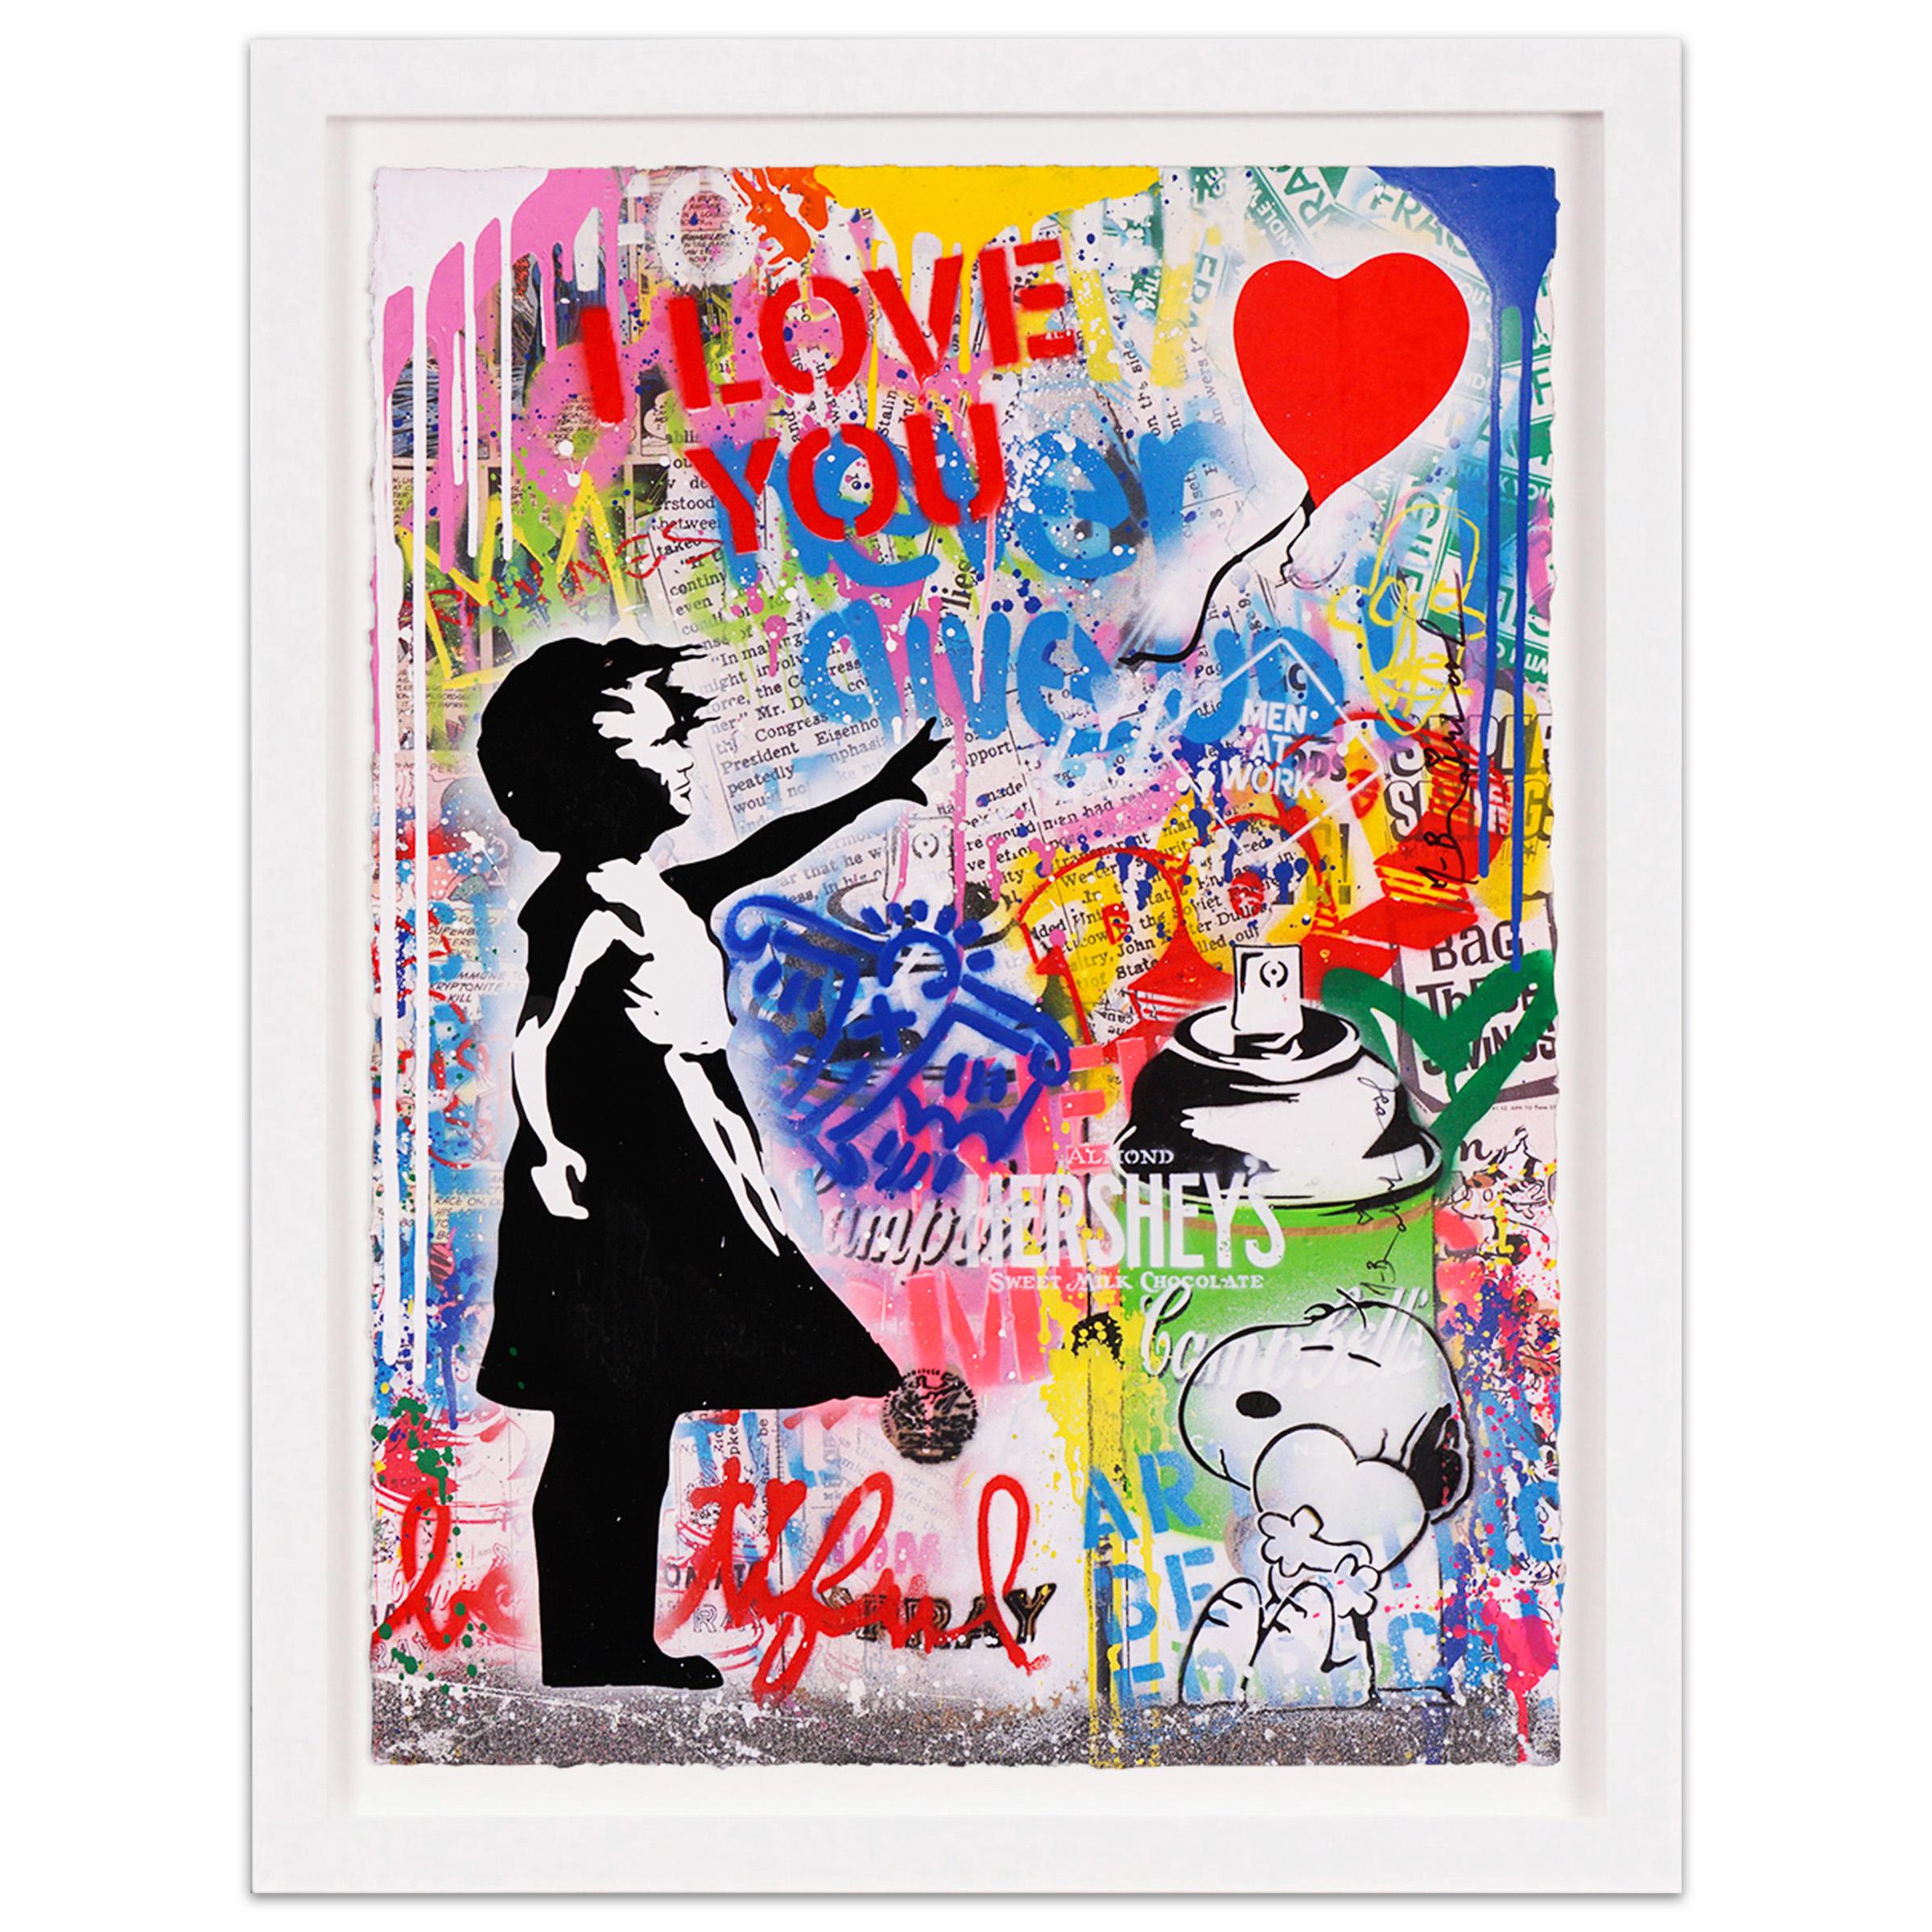 The graffiti street-art meets fine-art 'I Love You' Small Balloon Girl is a pop art masterpiece made with vibrant dripping acrylic paint, layered stencil, and mixed media, created in 2021 by contemporary street pop artist, Mr. Brainwash. The boldly